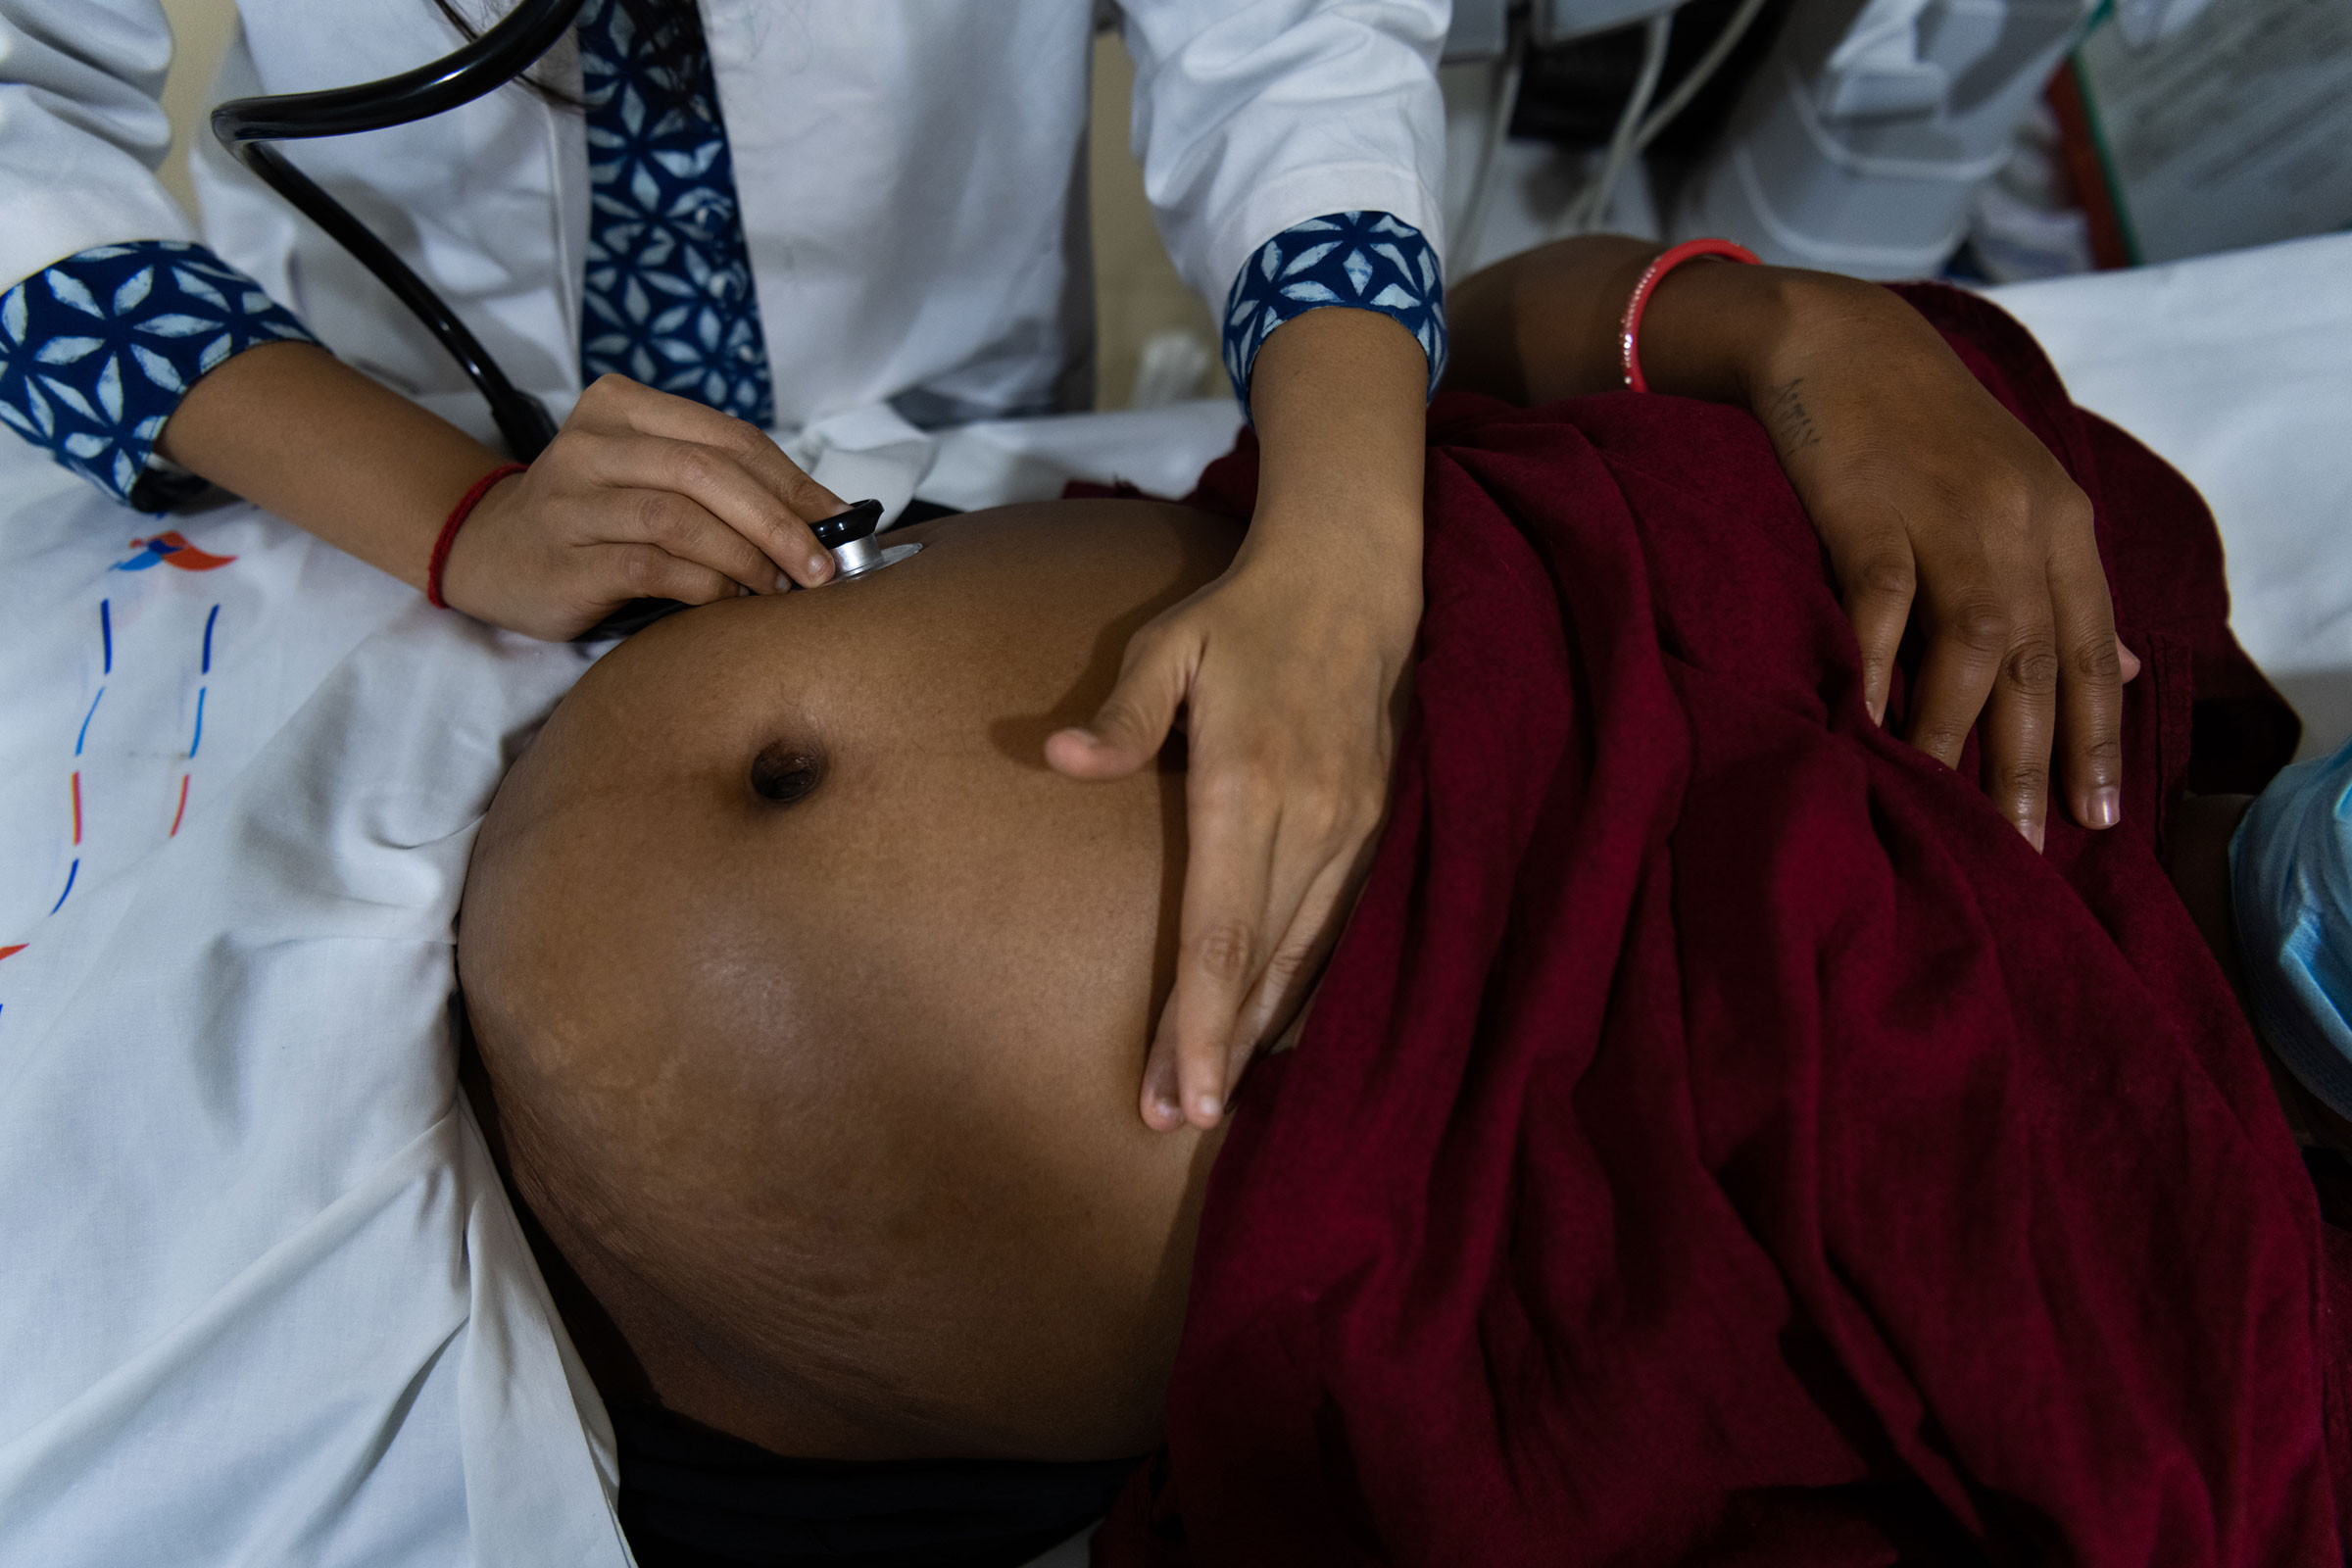 Kajal Vasava, 24, undergoes a checkup at Akanksha, seven months into her pregnancy. A first-time surrogate, Vasava has brought her 3-year-old daughter to stay with her at the clinic for the entire duration of her pregnancy. She turned to surrogacy after financial difficulties during India's COVID-19 lockdown.